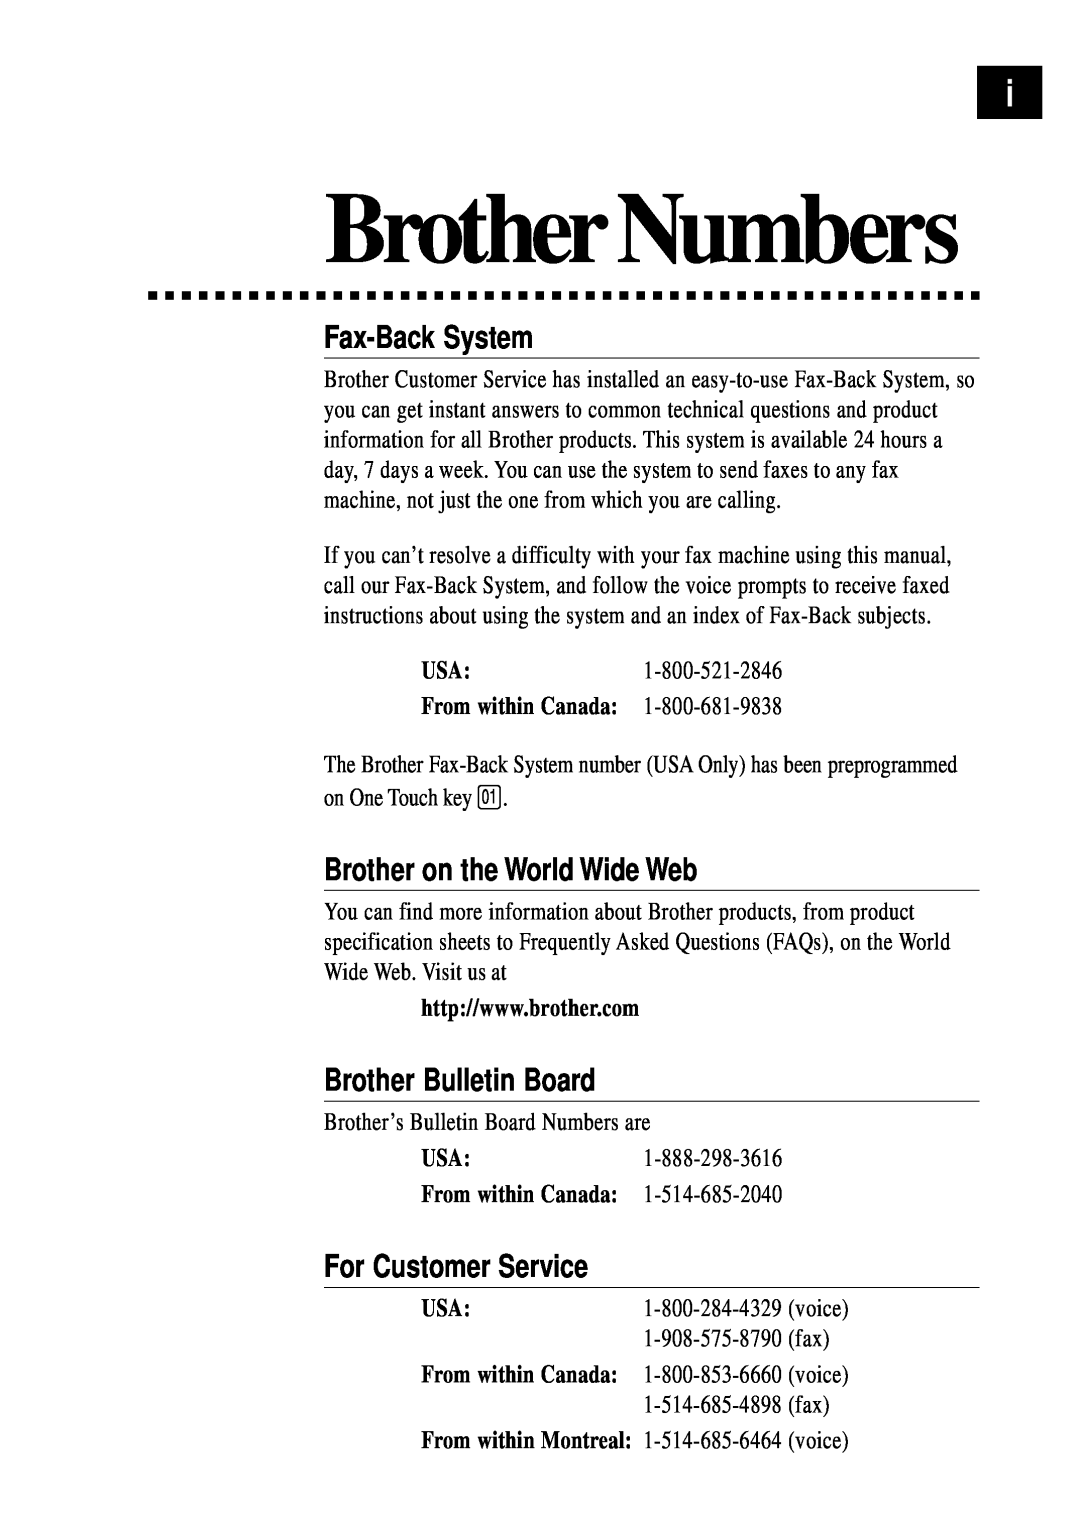 Brother FAX 255 BrotherNumbers, Fax-Back System, Brother on the World Wide Web, Brother Bulletin Board, From within Canada 